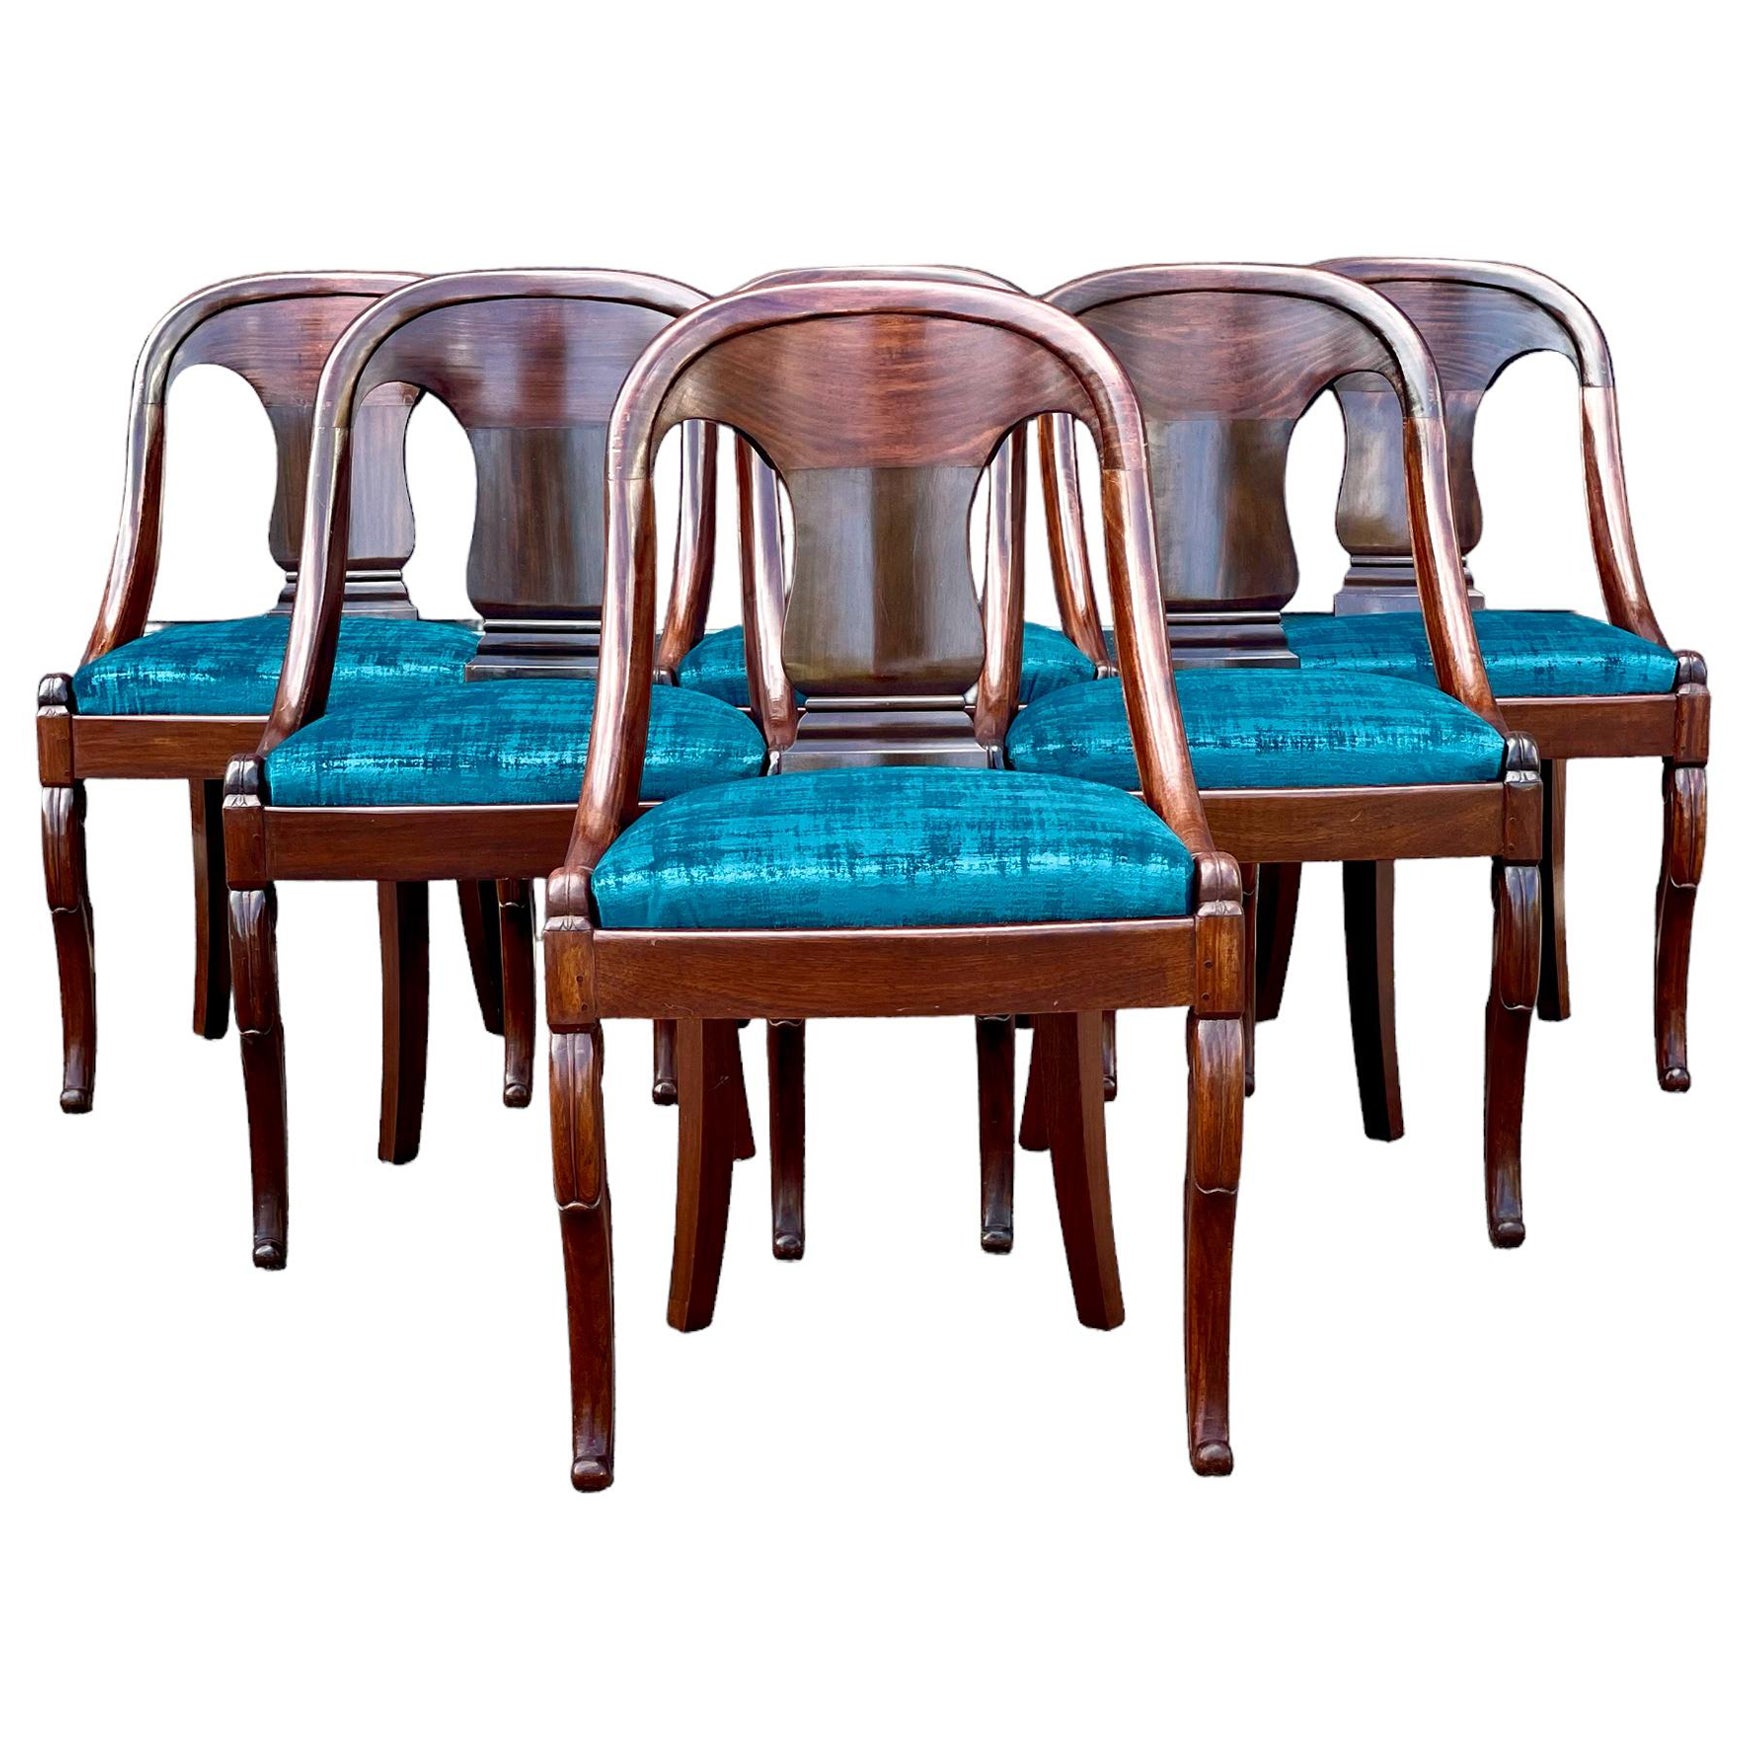 Set of Six French Restauration Period Gondola Dining Chairs